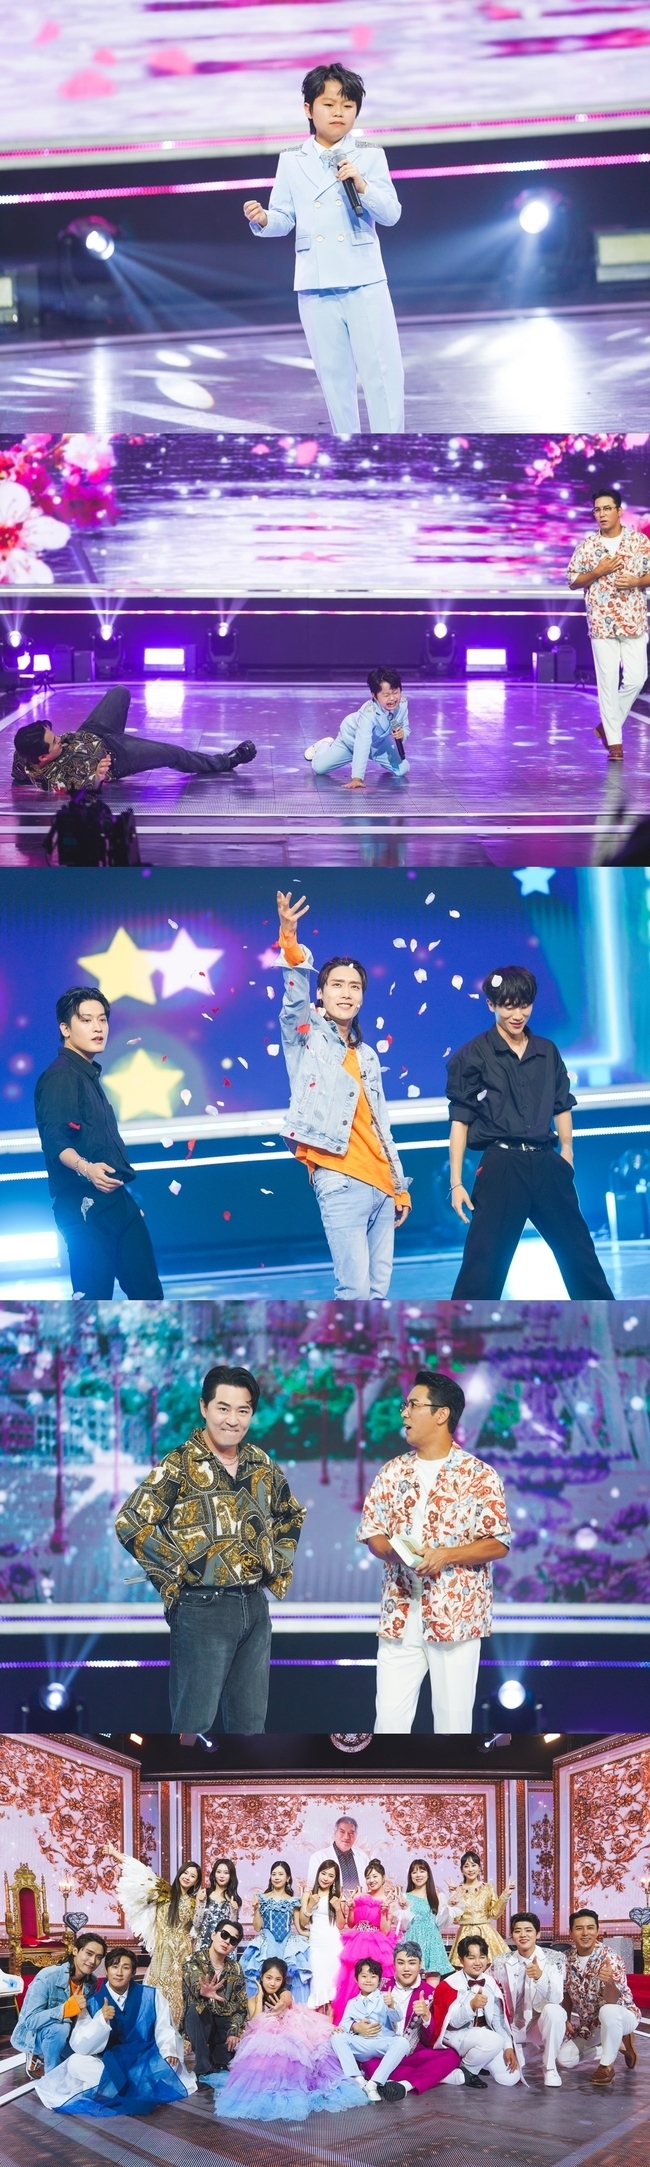 In Tuesday is a good night, Min-ho Hwang predicts the colorful stage of Little Na Hoon-a.The 82nd episode of TV CHOSUN entertainment Tuesday is a good night (hereinafter referred to as Hwabum), which is broadcasted on August 29, is featured in Na Hoon-a Song Festival and features choi woo-jin, Park Ji-hyun, Na Sangdo, ko jeong-woo, hong jam eun, Min-ho Hwang.On this day, the cast will be Mr. Trots Emperor and Legend of Legend Na Hoon-as famous songs only Deathmatch confrontation.In order to sing the legend, choi woo-jin, Park Ji-hyun, Na Sangdo, ko jeong-woo, hong jam eun, and Min-ho Hwang, who say themselves Na Hoon-a steamer .Especially on this day, choi woo-jin perfectly reproduces Na Hoon-as hairstyle to stage costume and reveals his fanfare toward Na Hoon-a.I was an examinee who dreamed of being a police officer, but I decided to become a singer by listening to Na Hoon-as song. Choi woo-jin calls a broken wall clock and catches eyeballs from the opening.I wanted to grow my own hair, but it wasnt easy, so I stuck it on. It took me three hours just to put it on, said choi woo-jin, who perfectly digested Na Hoon-as charismatic long hair, appealing how much she cared about the song as well as the visuals.Choi woo-jin, who selected Change as a Deathmatch confrontation song, said, I practiced a month for this stage.Little Na Hoon-a Min-ho Hwang, who resembles Na Hoon-a from sensitivity to showmanship, is enthusiastic about ummae and tunny on this day.Min-ho Hwang gives an impression from the opening with Ama, and The Scream Adverb when he calls Tumney which was a Deathmatch confrontation song.On the stage of Min-ho Hwang, MC Boom says, Na Hoon-a teacher would have been surprised to see the broadcast.Min-ho Hwang also works as a little evaluation team with hong jam eun. When asked about the criteria for judging, Min-ho Hwang says, I will press the heart to the person who can move my heart.MC Boom and Jang Min-ho are referring to Min-ho Hwangs favorite Kang Ye-seul, and Min-ho Hwang is the back door that caused a pupil earthquake and laughed.In addition, Na Sangdo X Park Ji-hyun X choi woo-jin presents a special stage with 18 years old.From the pleasant stage of the visual trio to the perfect reinterpretation of Na Hoon-as masterpieces, the previous stage of the cast is August 29th Tuesday nights Mr.Trot Gala Show TV CHOSUN Tuesday is a good night 82 times.(Photo courtesy of CHOSUN  ⁇ Tuesday is a Good Night ⁇